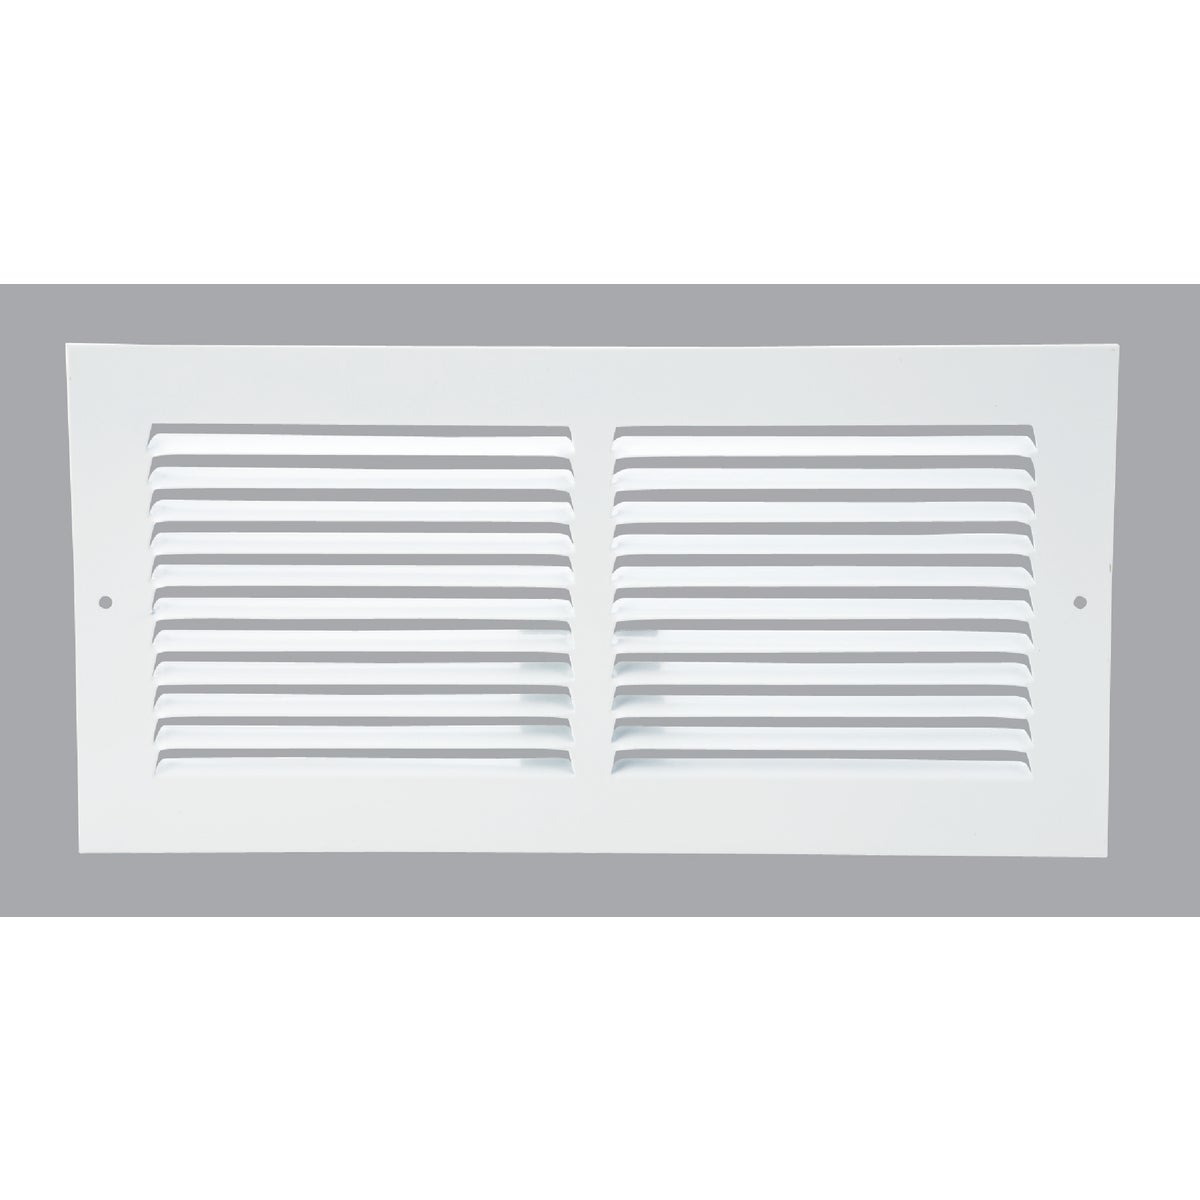 Home Impressions 6 In. x 14 In. Stamped Steel Return Air Grille